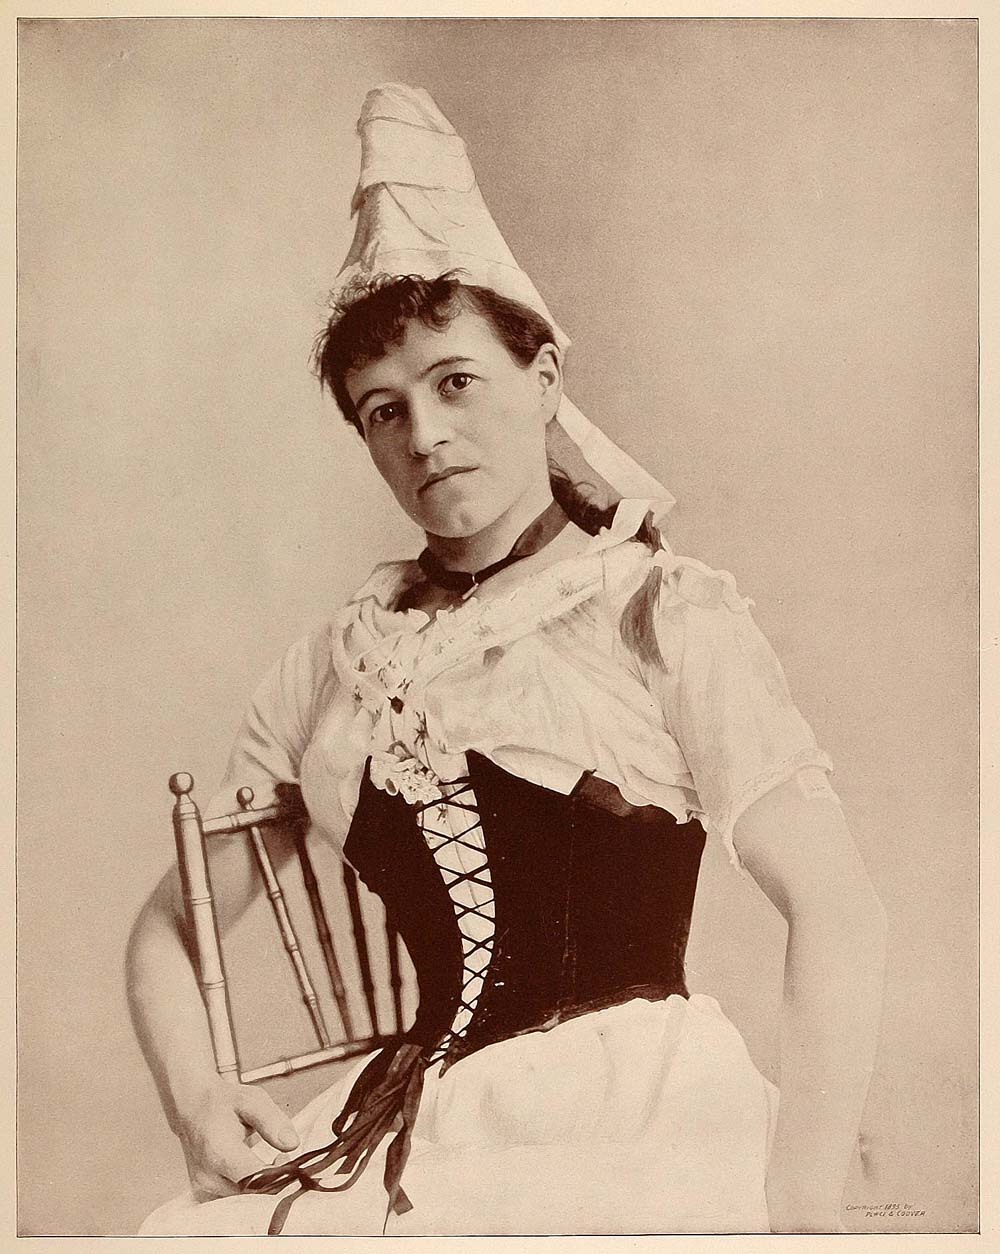 1893 Chicago Worlds Fair Portrait French Peasant Woman Normandy Costume Historic